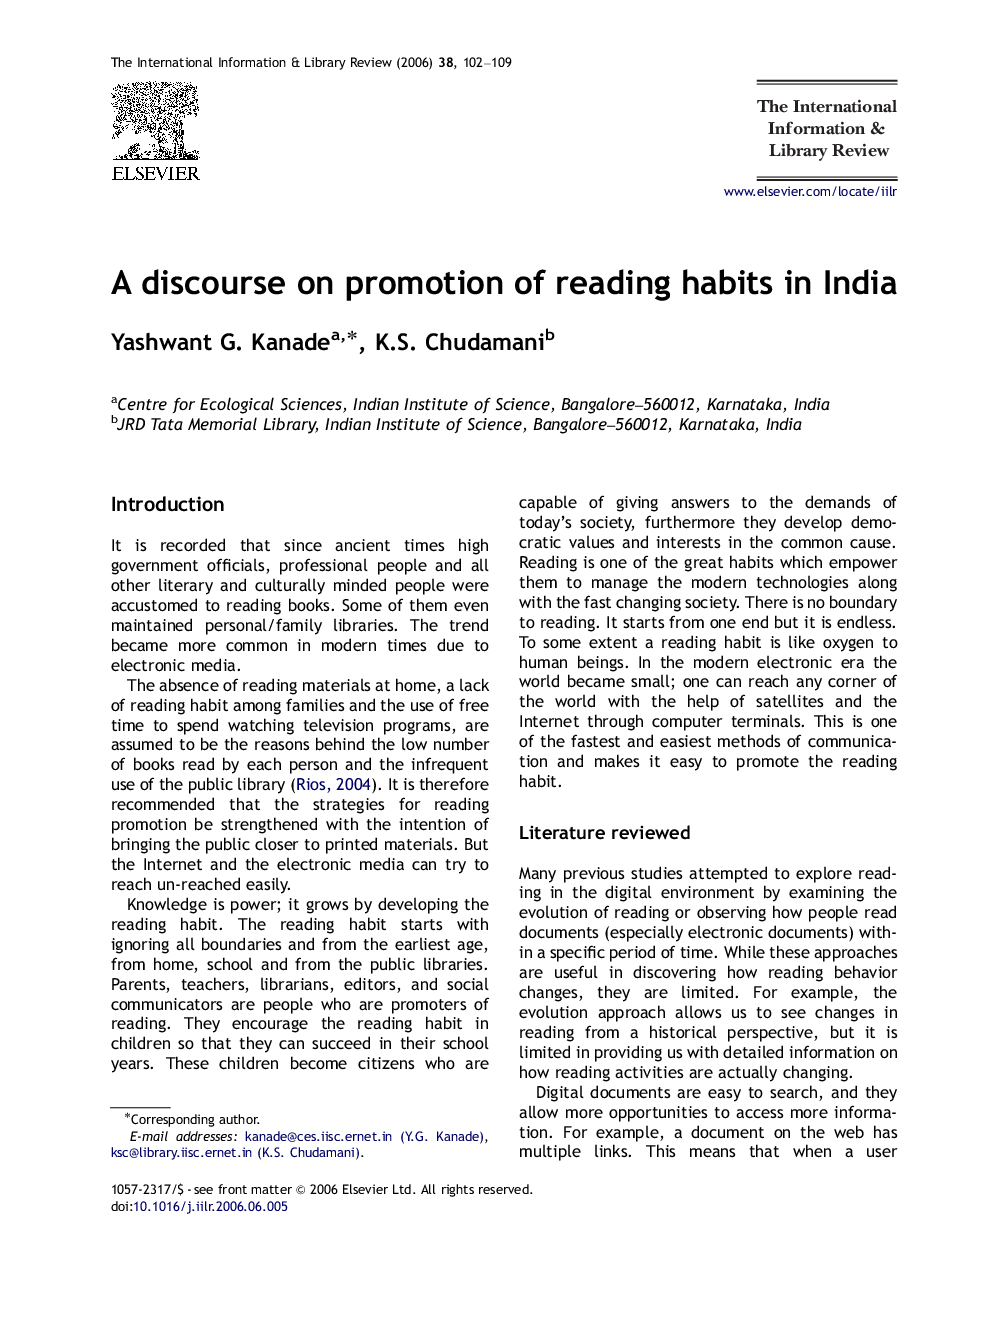 A discourse on promotion of reading habits in India